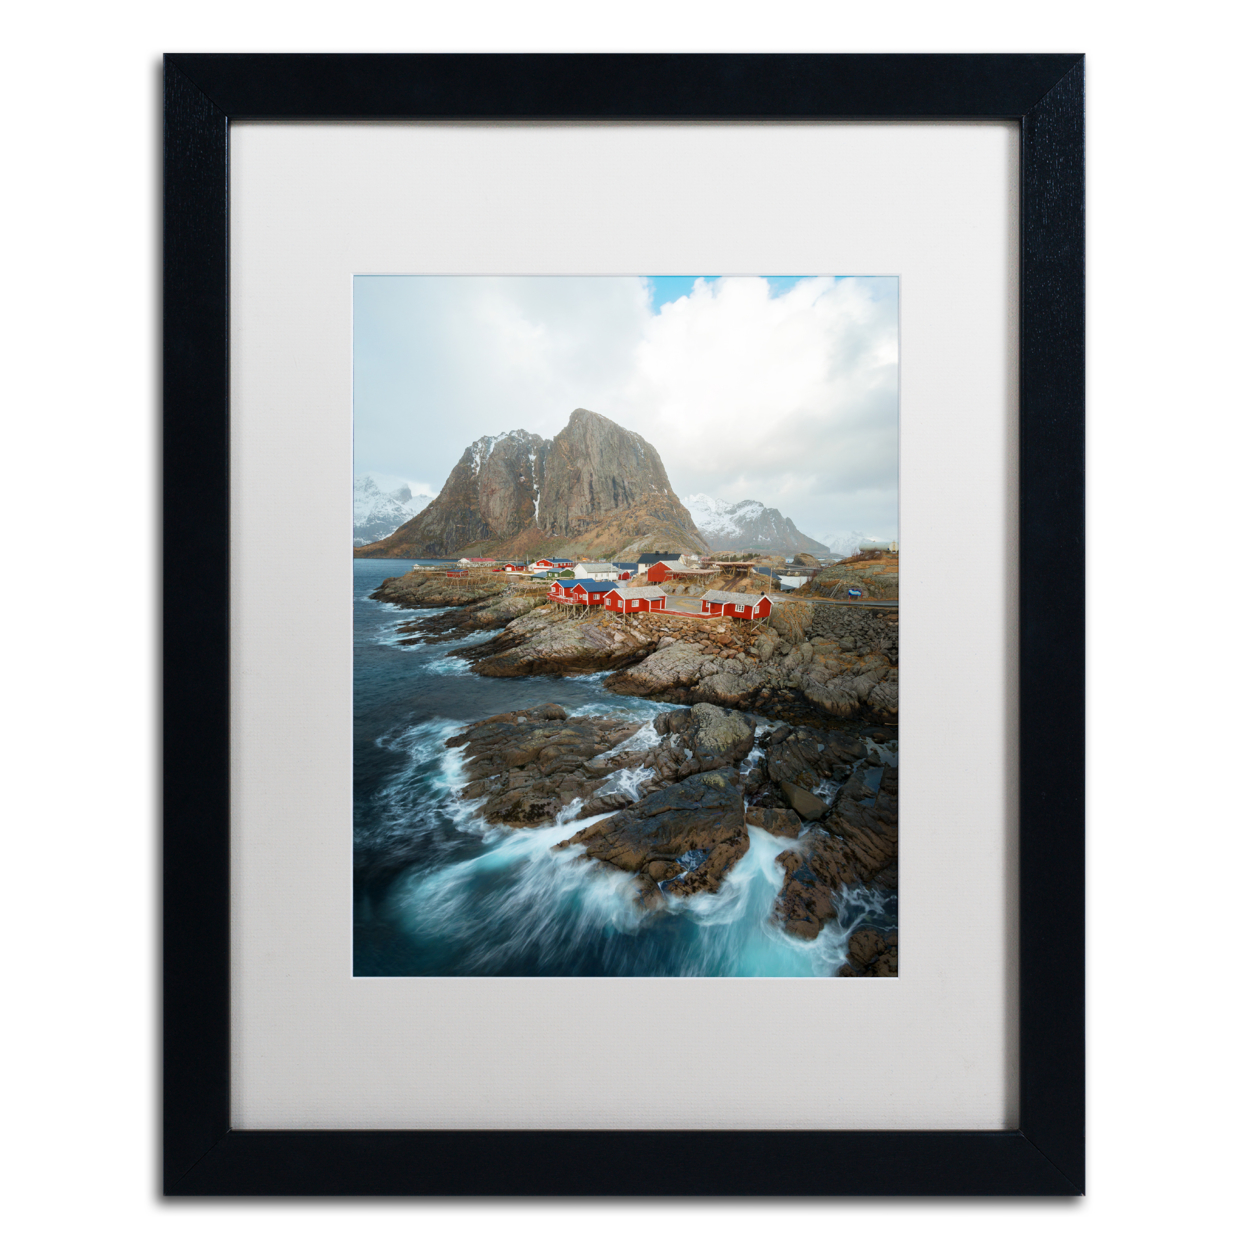 Philippe Sainte-Laudy 'Hamnoy' Black Wooden Framed Art 18 X 22 Inches